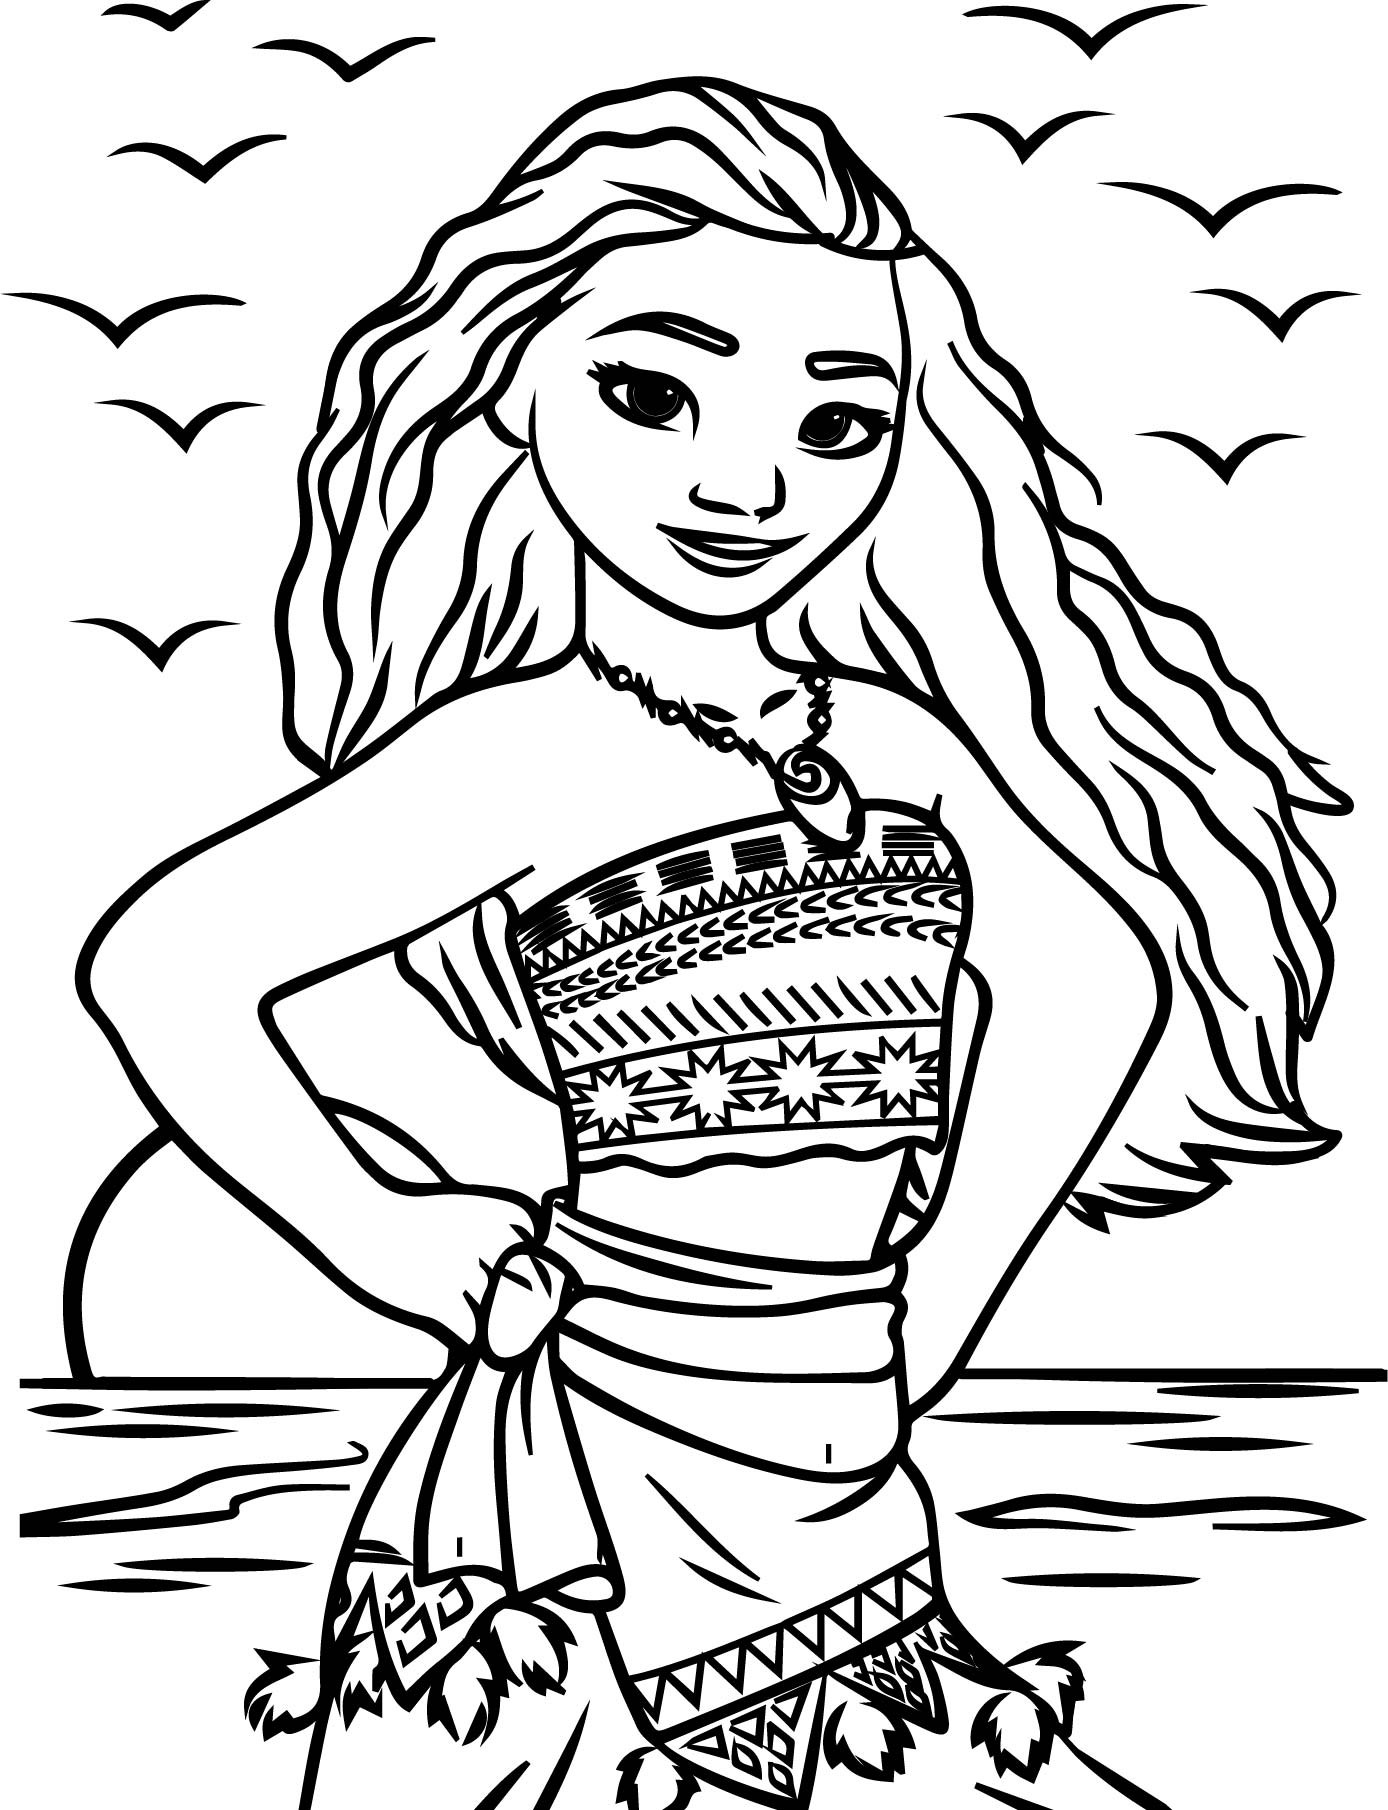 Moana Coloring Pages For Toddlers
 Disney Moana Coloring Page